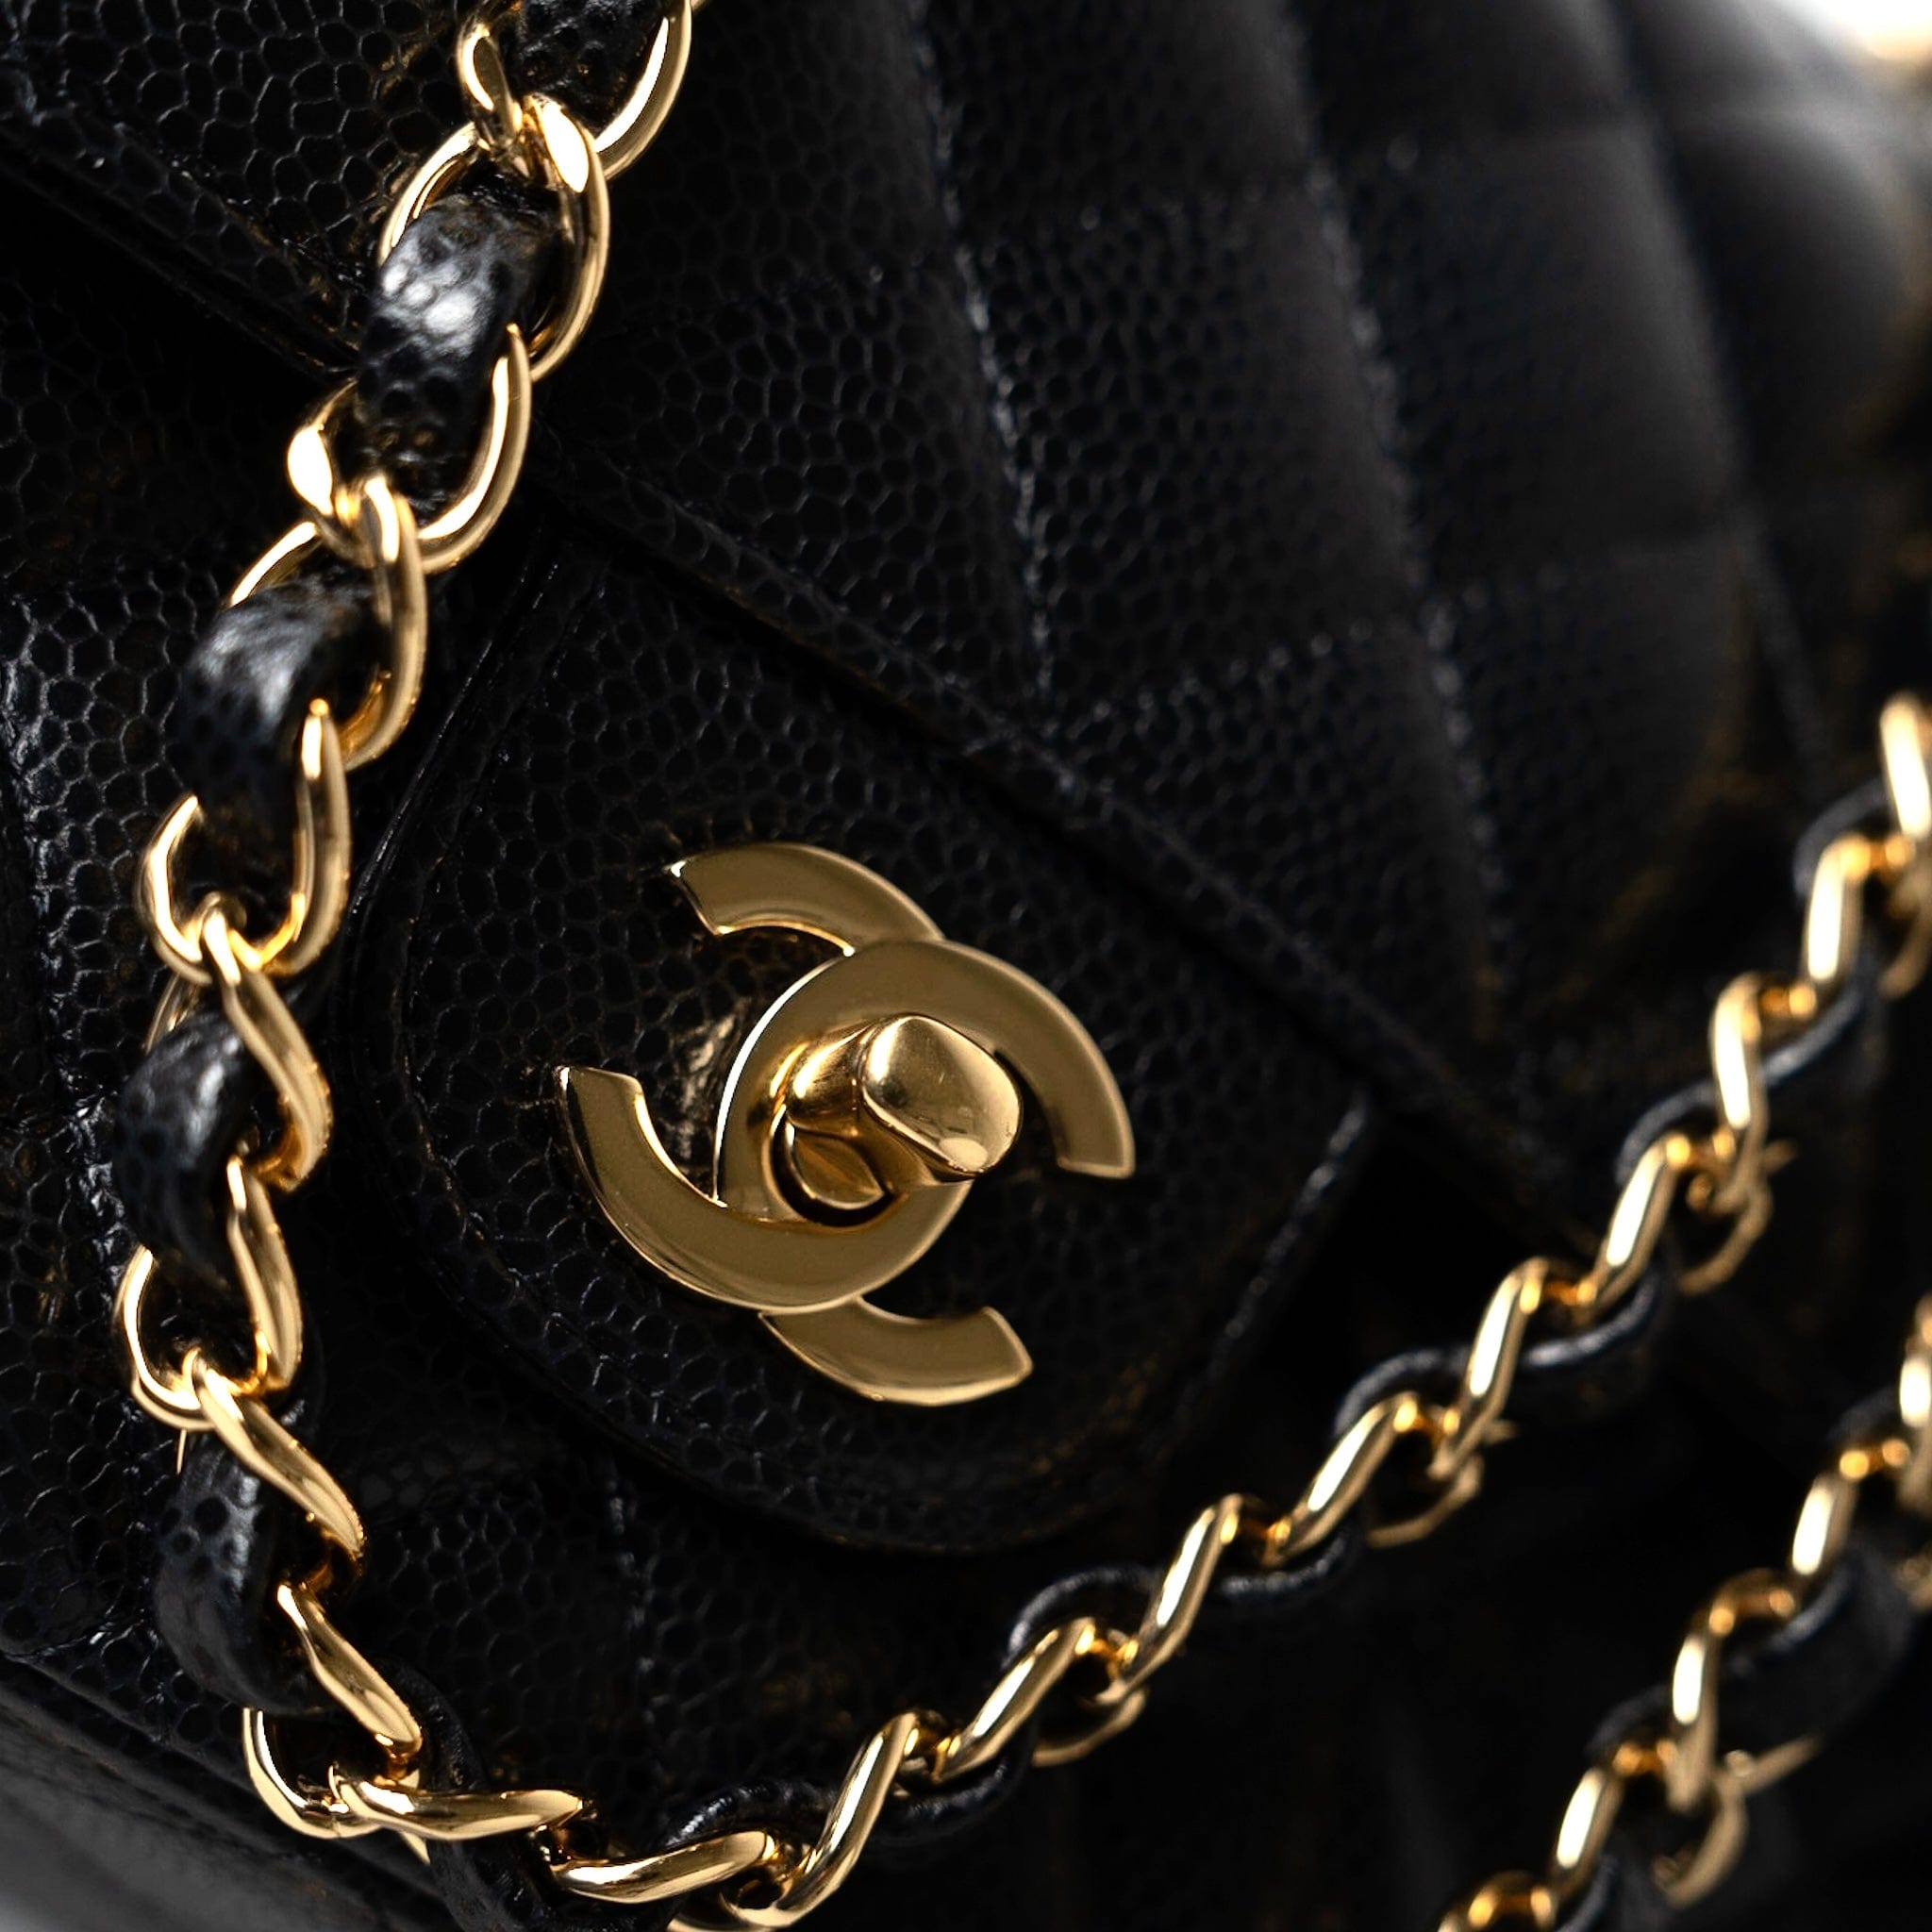 CHANEL Handbag Black Classic Flap Medium Caviar Quilted Gold Hardware - Redeluxe